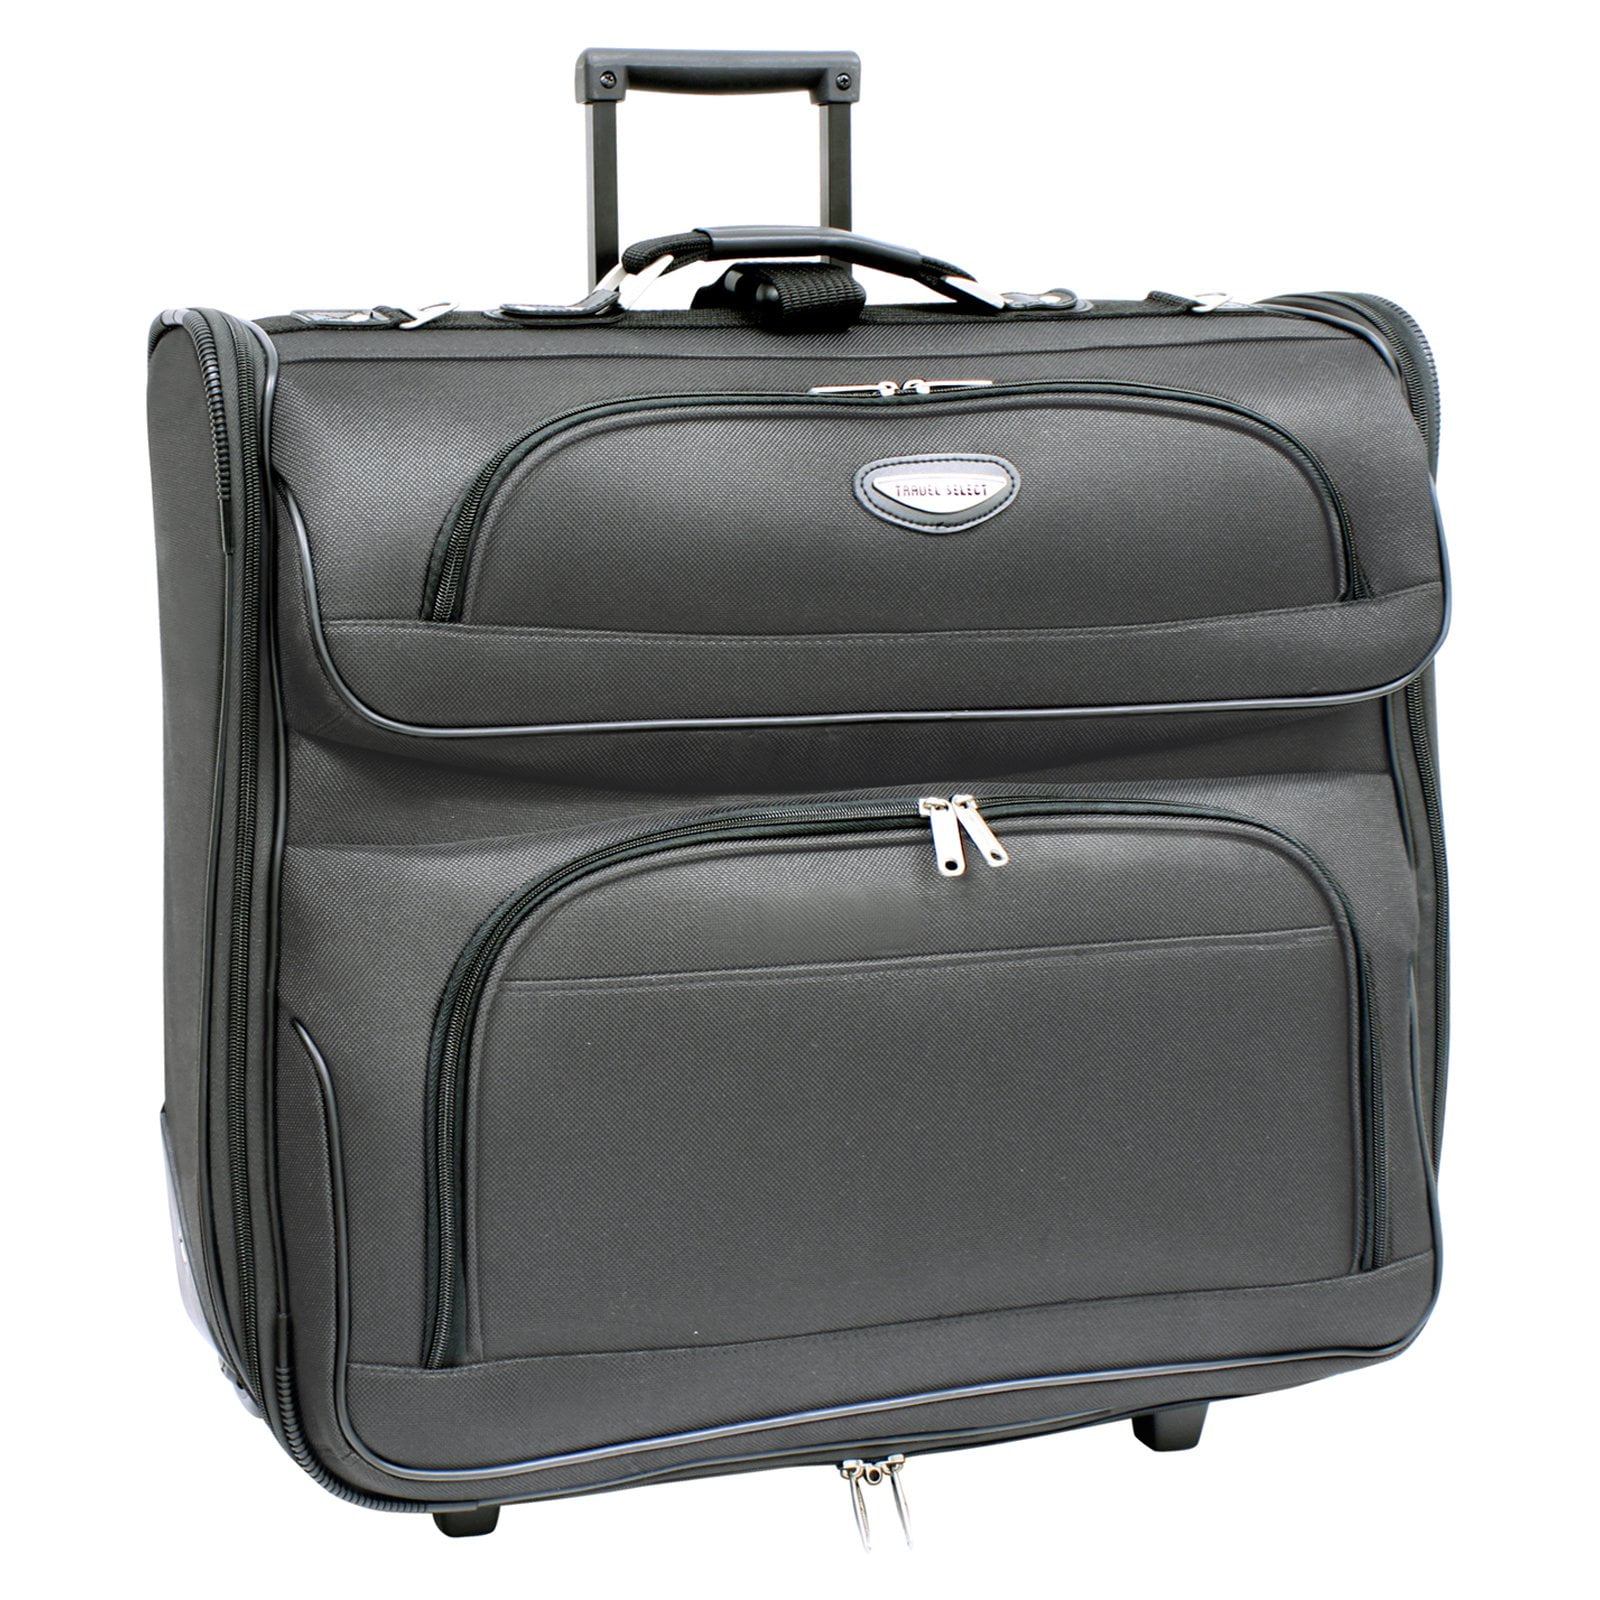 luggage sets with garment bag included